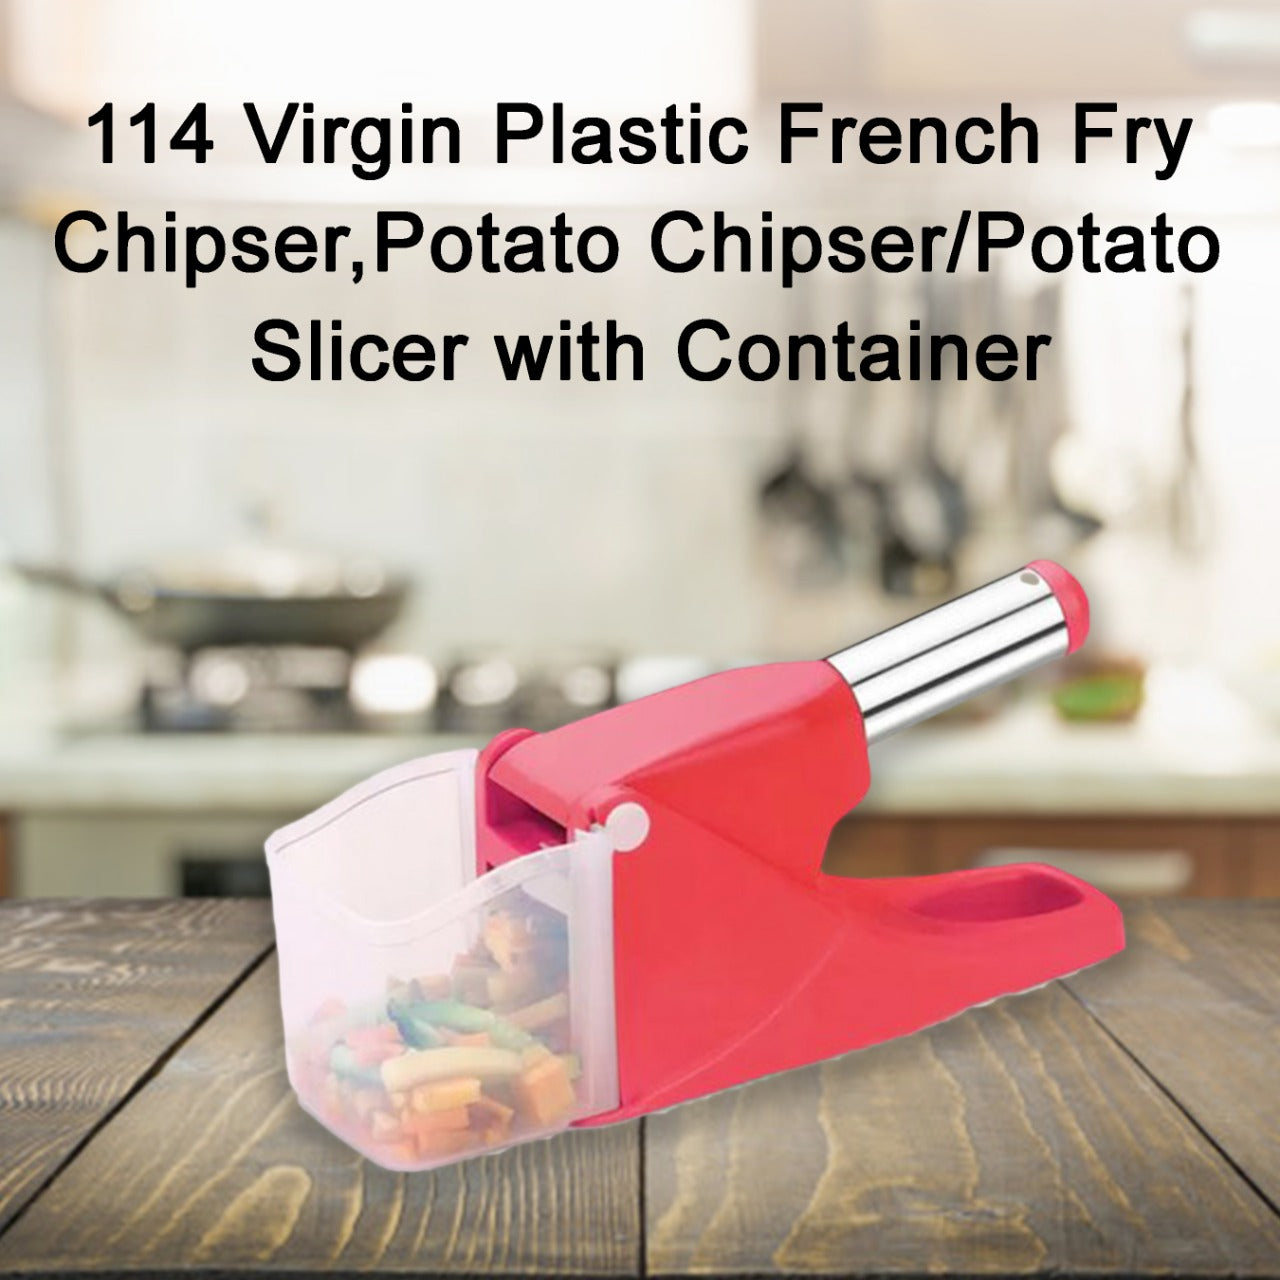 114 Virgin Plastic French Fry Chipser, Potato Chipser/Potato Slicer with Container DeoDap